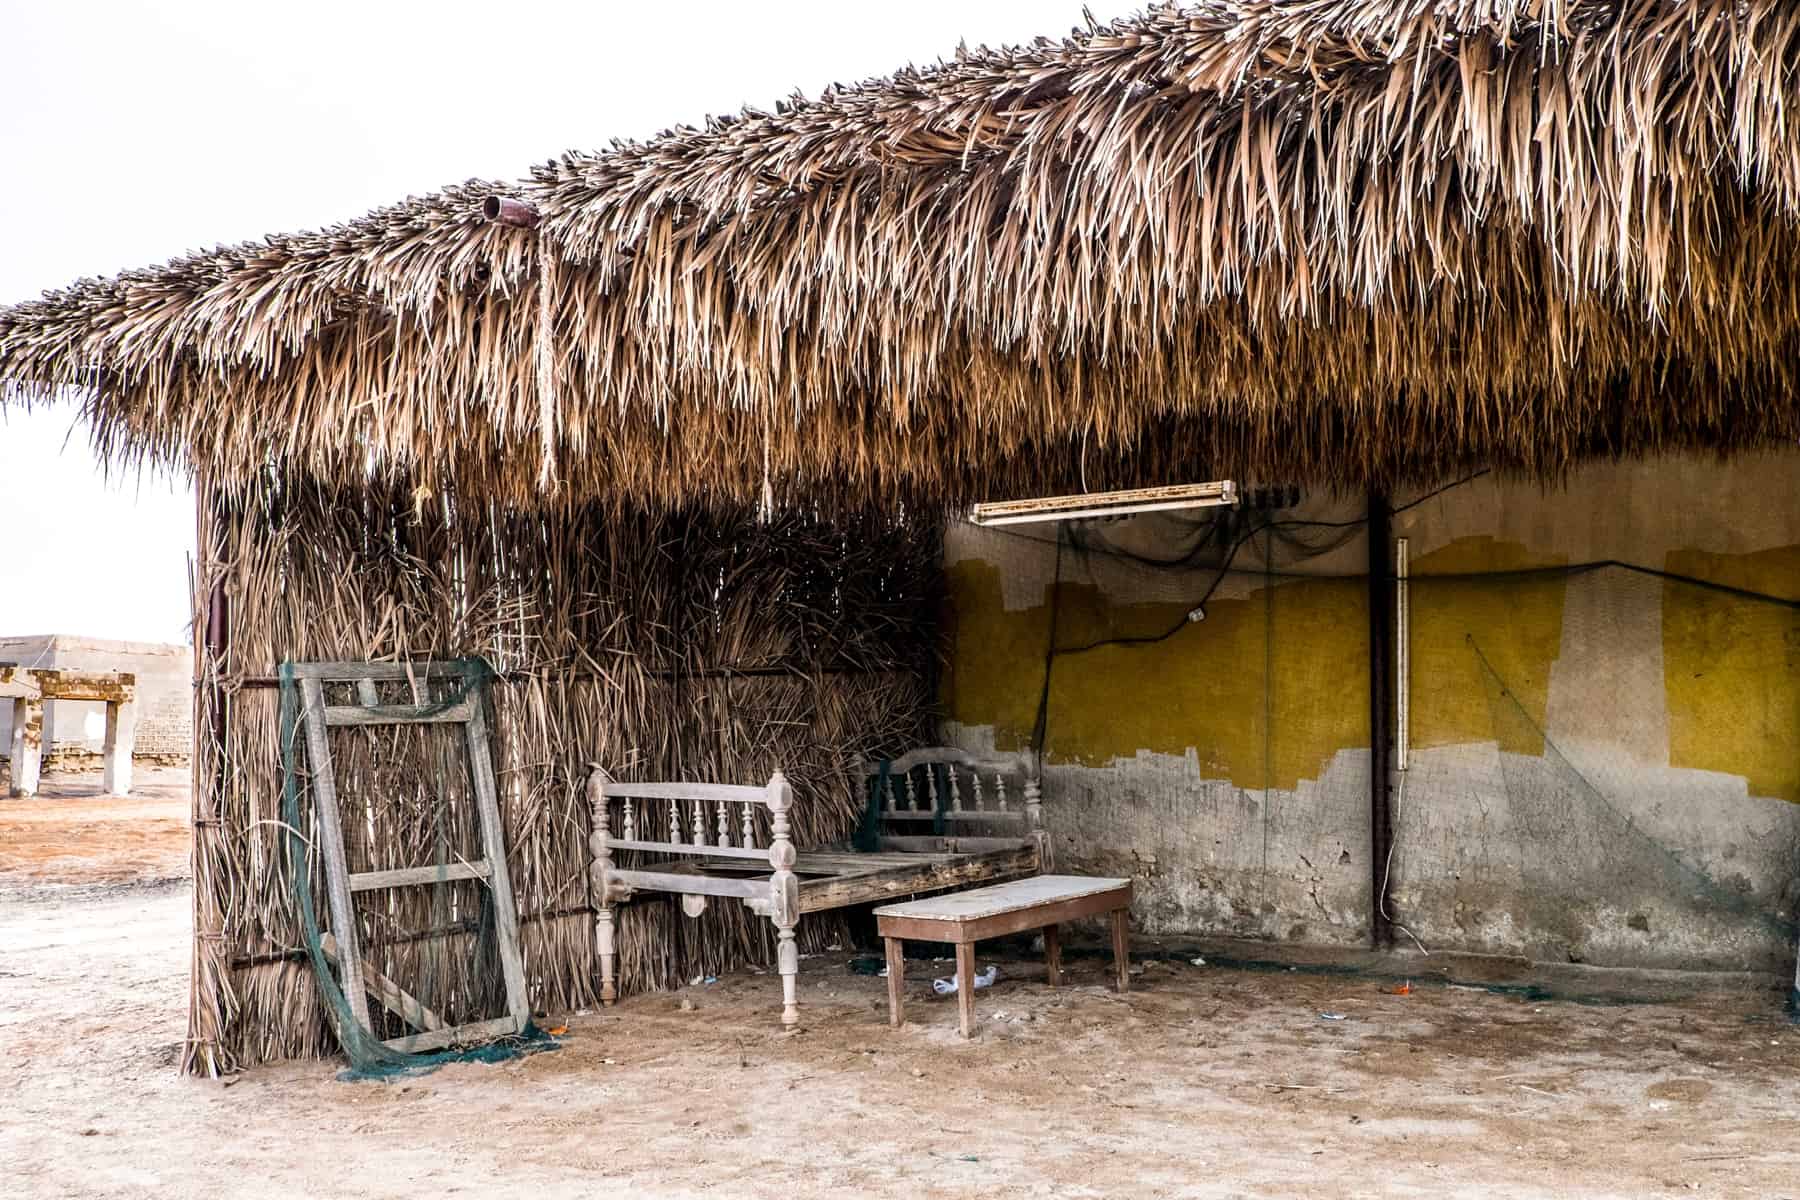 An abandoned house whose roof and one wall is made of dried reeds, contains an abandoned bed frame and table - remnants of the ghost town in Ras Al Khaimah 